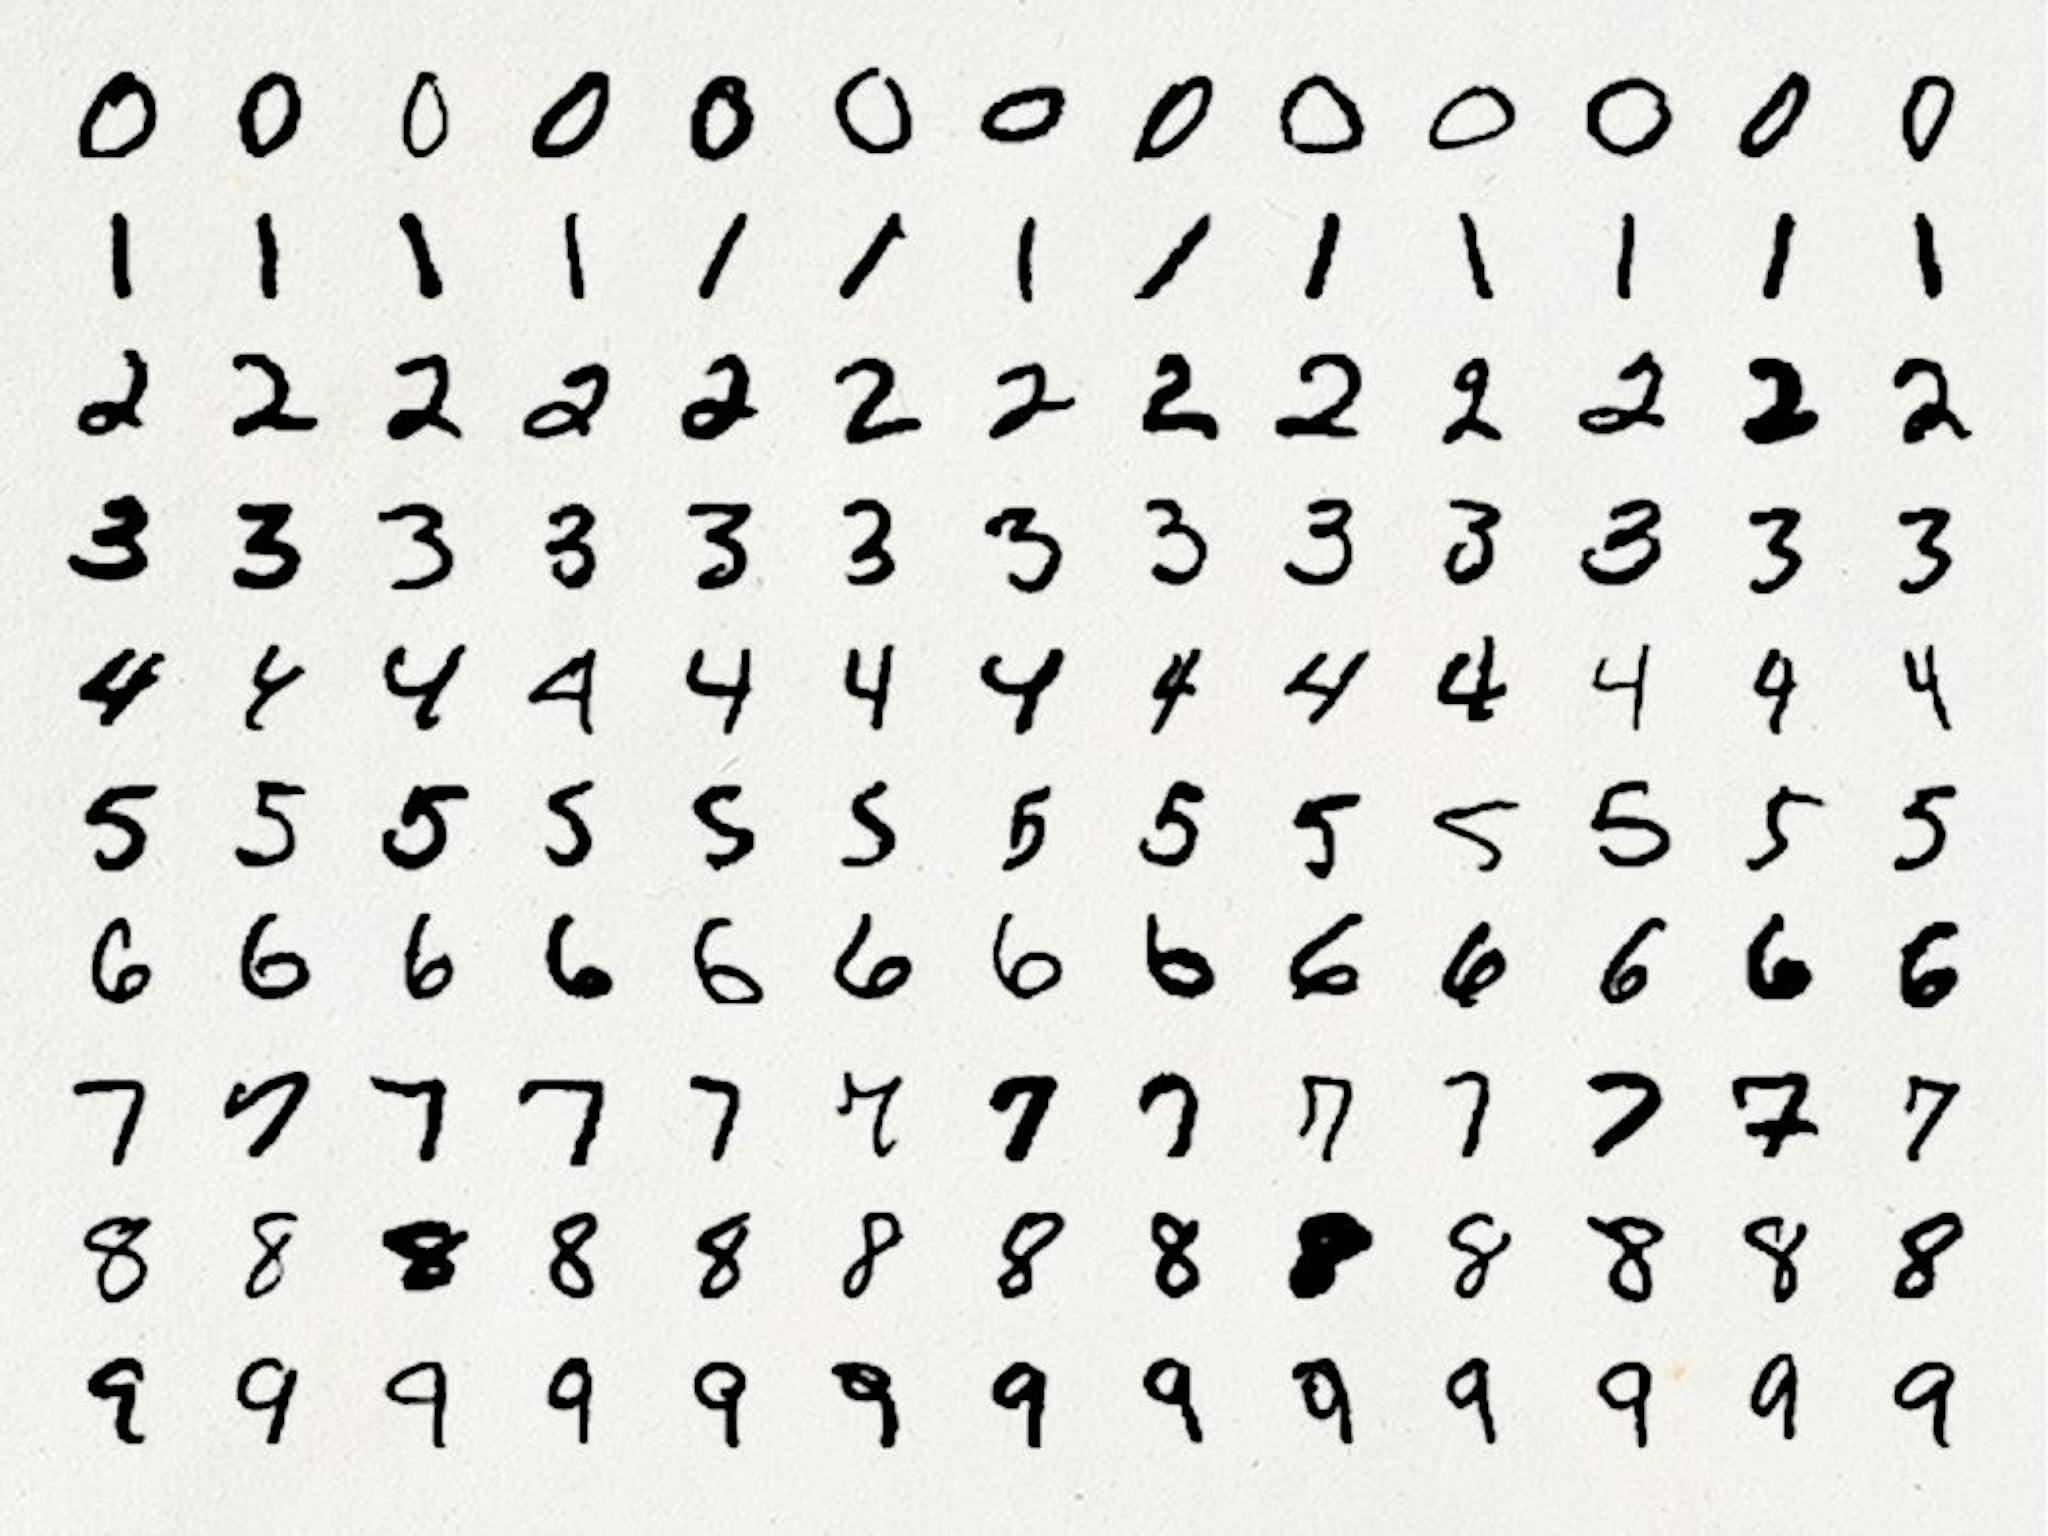 A representation of the MNIST dataset